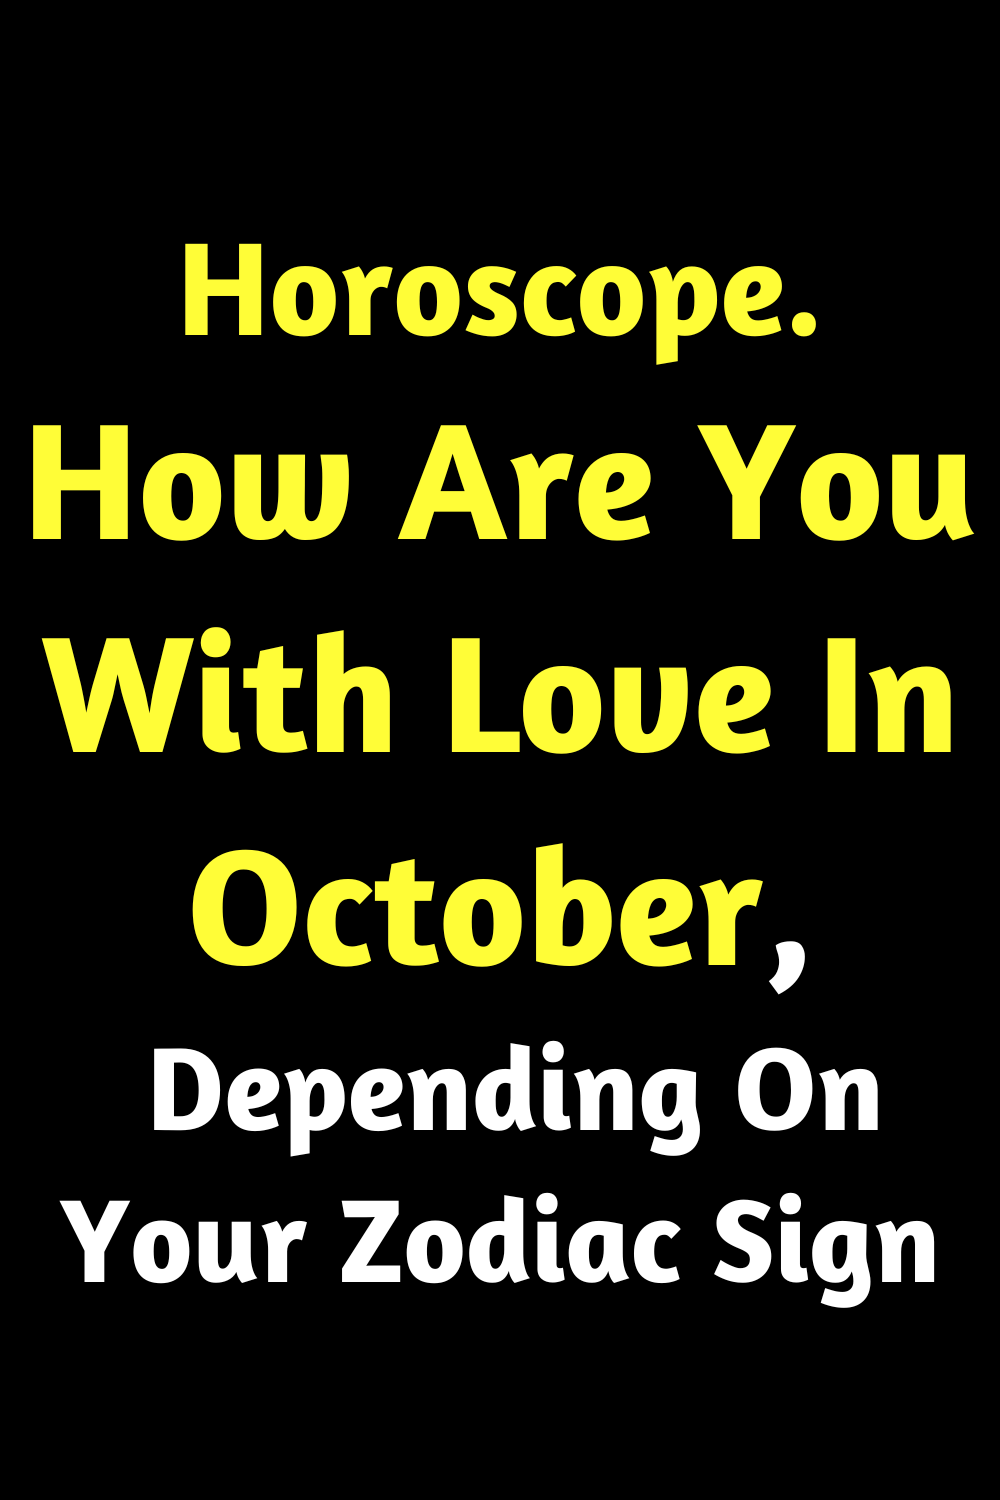 Horoscope. How Are You With Love In October, Depending On Your Zodiac Sign